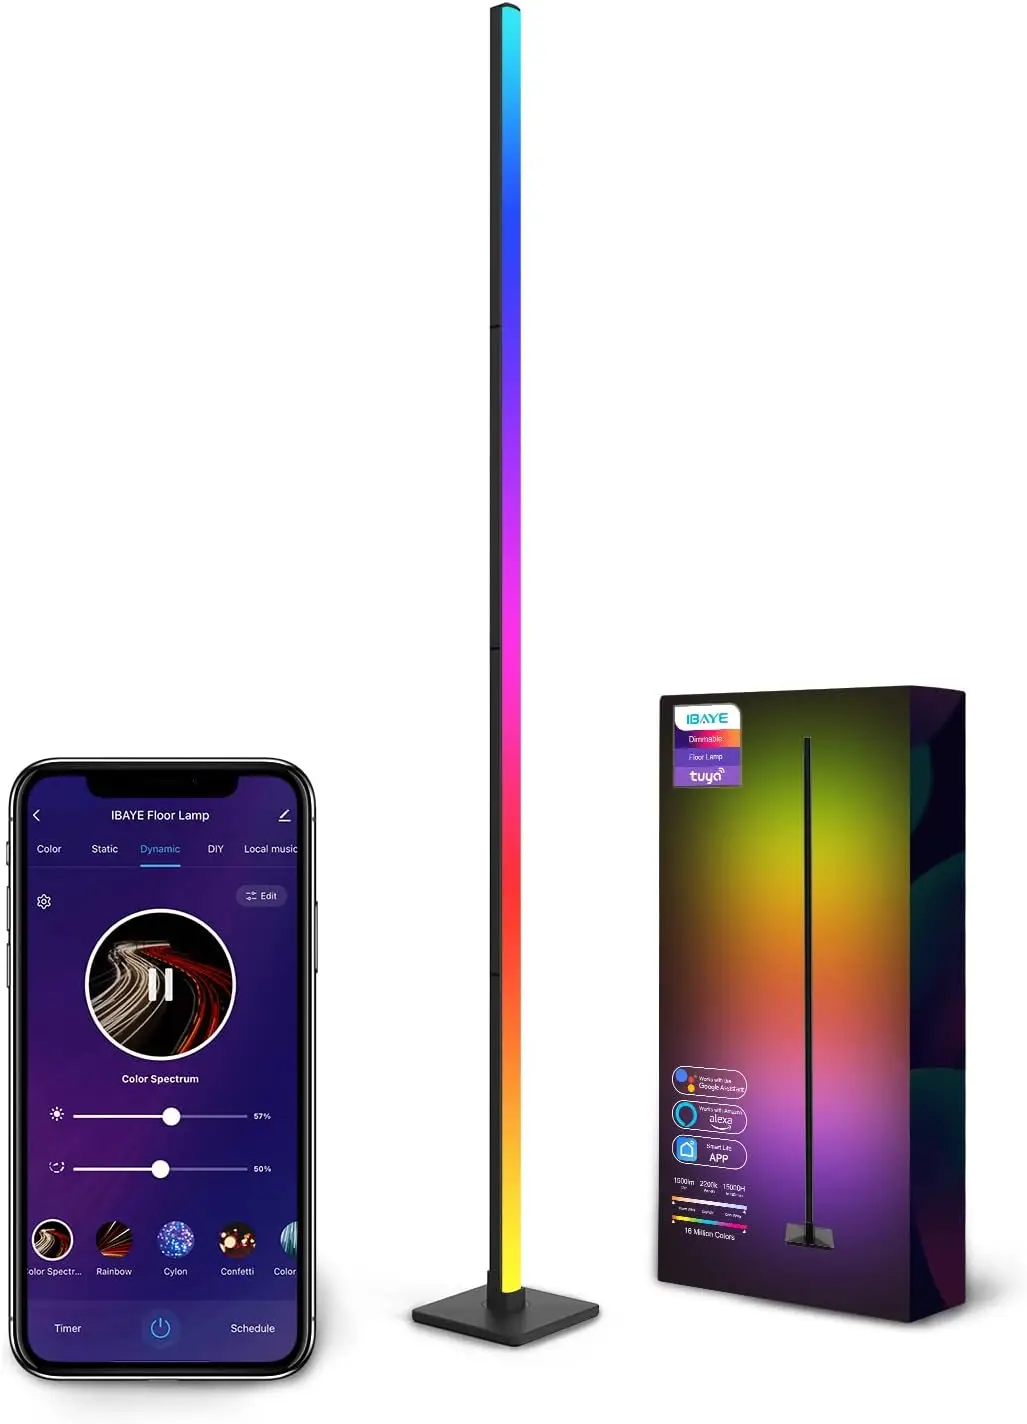 

Floor Lamp,LED Smart Floor Lamp,16 Million Colors, DIY & Scene Mode,Music Sync,compatible with Google Assistant and Alexa,Wi